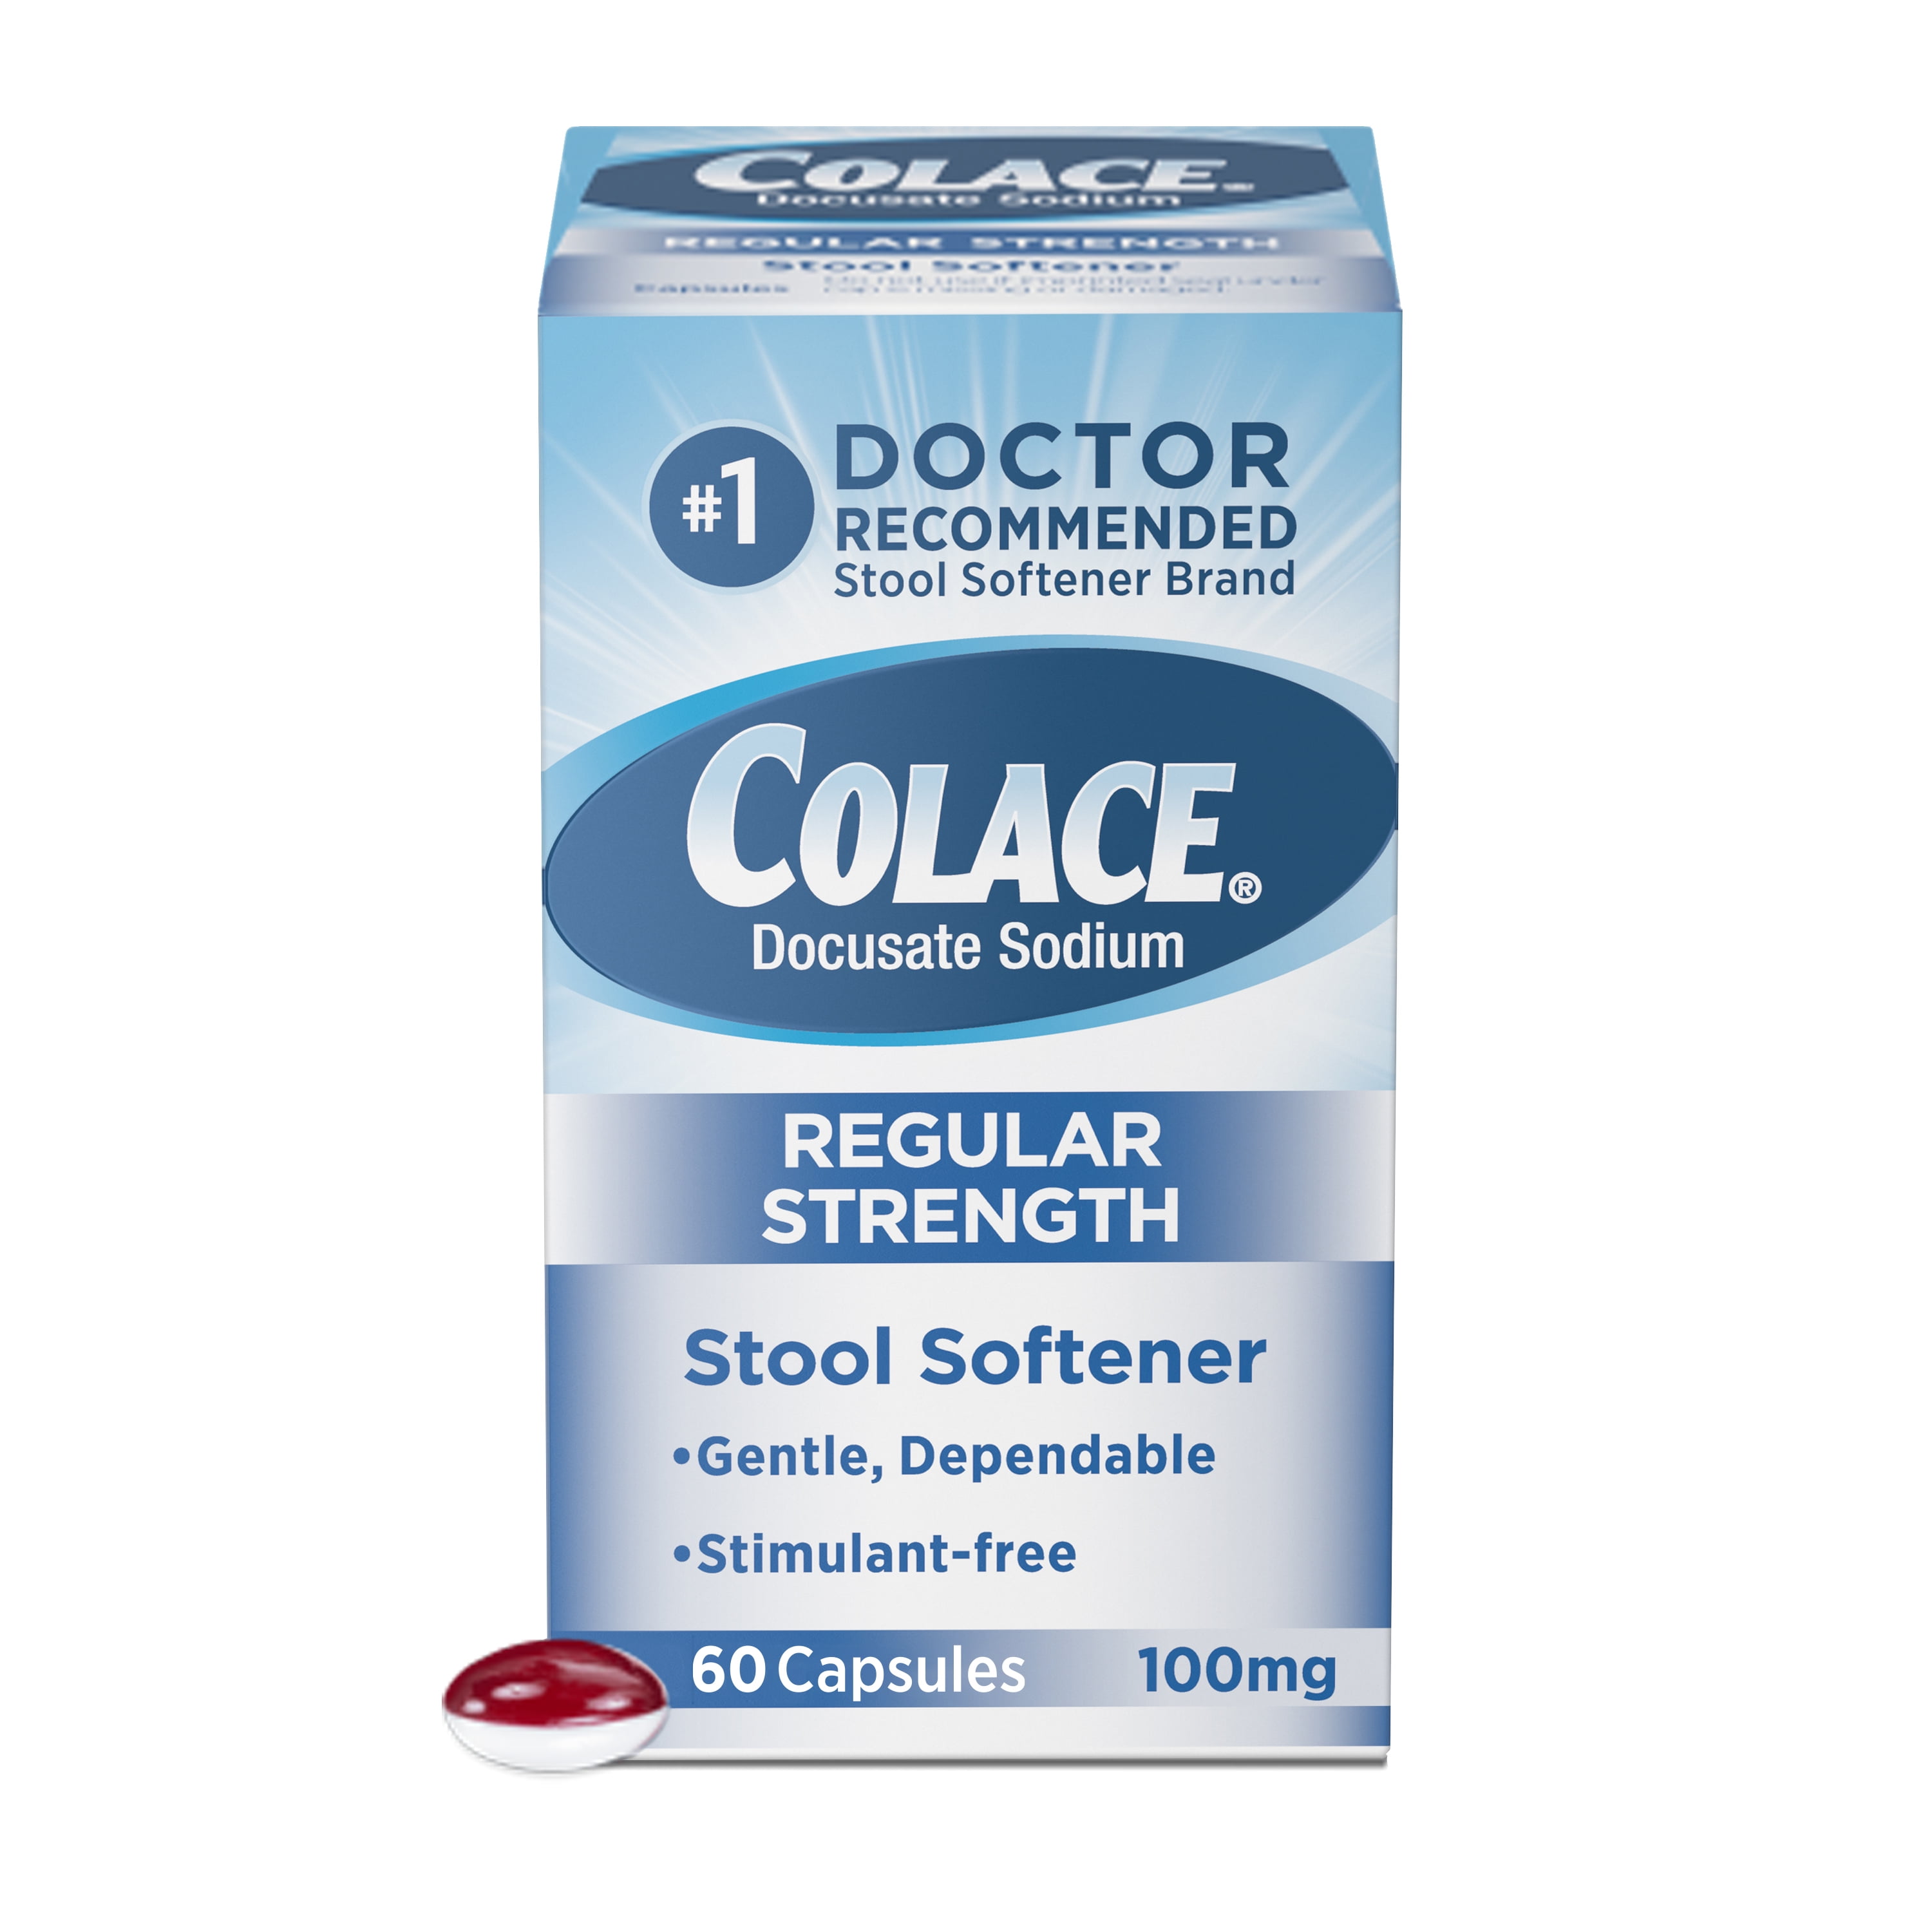 Colace Regular Strength Stool Softener for Constipation Relief, 100mg Capsules, 60 ct